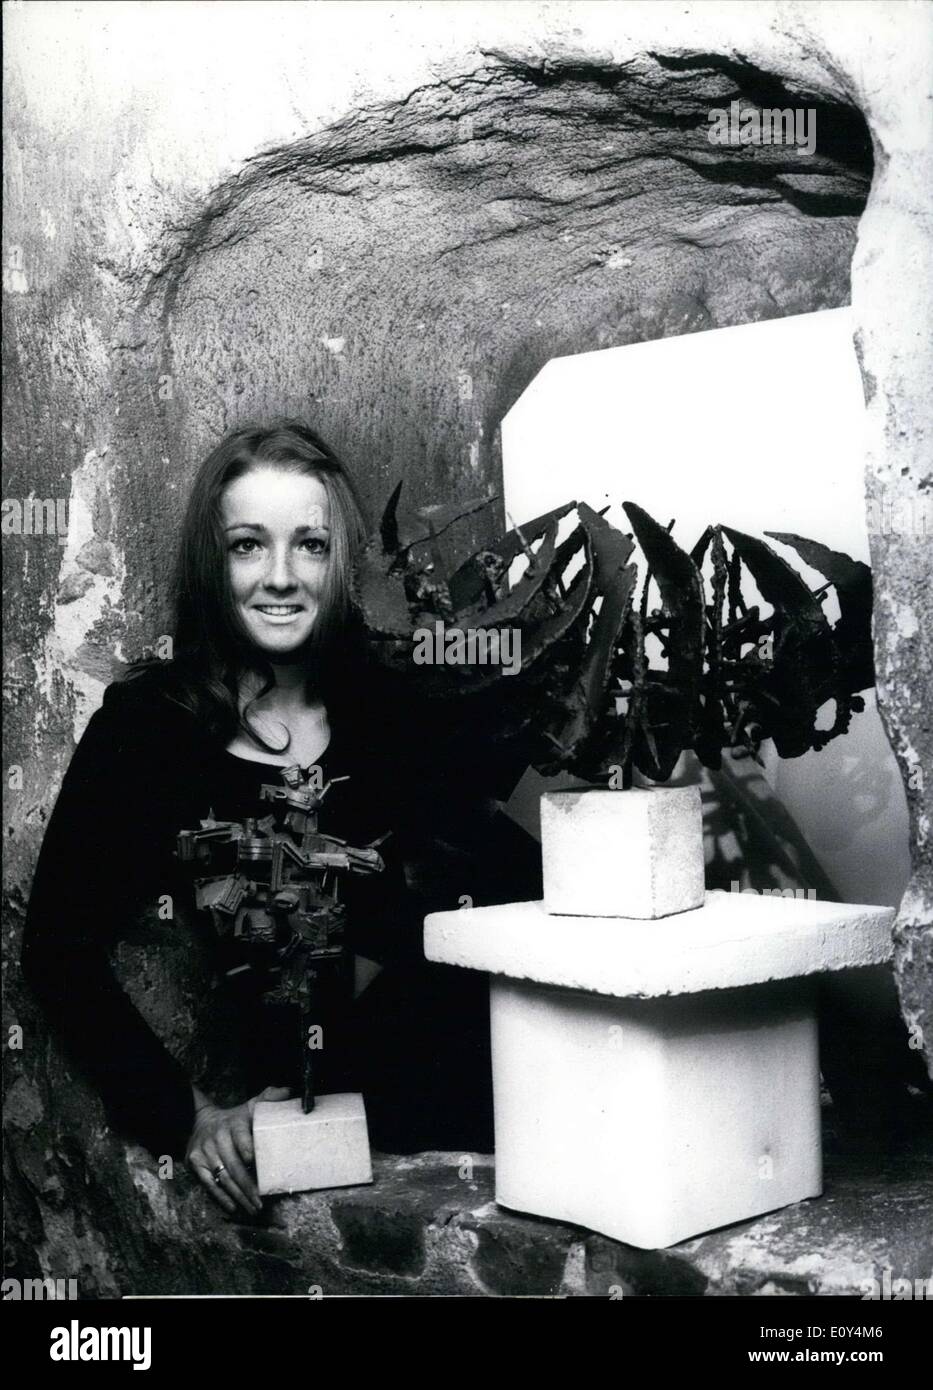 Oct. 21, 1968 - ''All for the art...'' is the motto of the well-known choreographer R. Kaluza, most of whose life is indeed dance, but she also is very interested in painting and sculpture. In the solemn walls of an old tower in Homburg castle she arranged a display of a mini-gallery of both known and still unknown artists. Here we see the work of G?nther Berger, titled ''Plastiken aus Schrott. Stock Photo